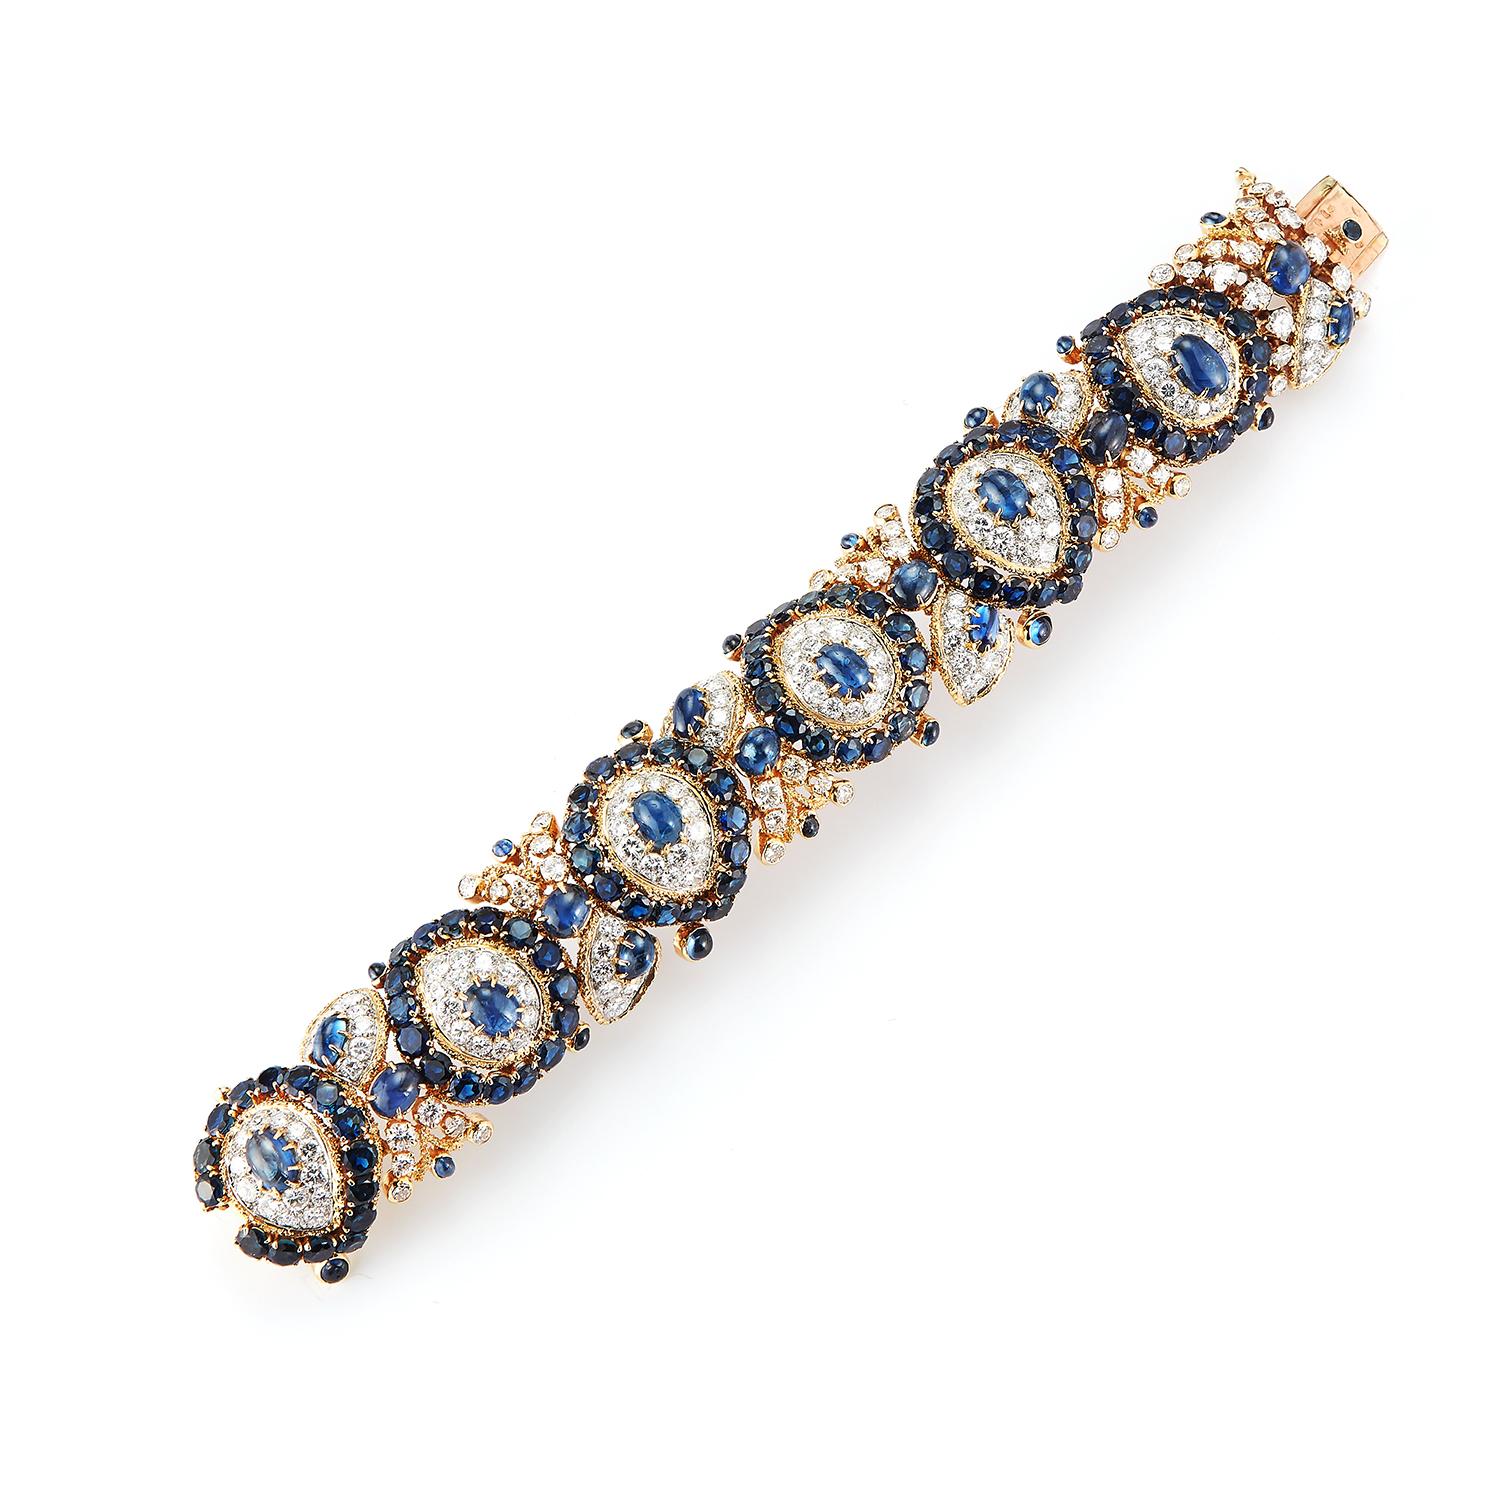 Magnificent Sapphire Bracelet by Van Cleef and Arpels, 
176 round cut diamonds, 96 round cut sapphires, 18 small cabochon sapphires & 18 large cabochon sapphires all set in 18K Yellow Gold.
Approx 25 carats of diamonds
Measurements: 7.25